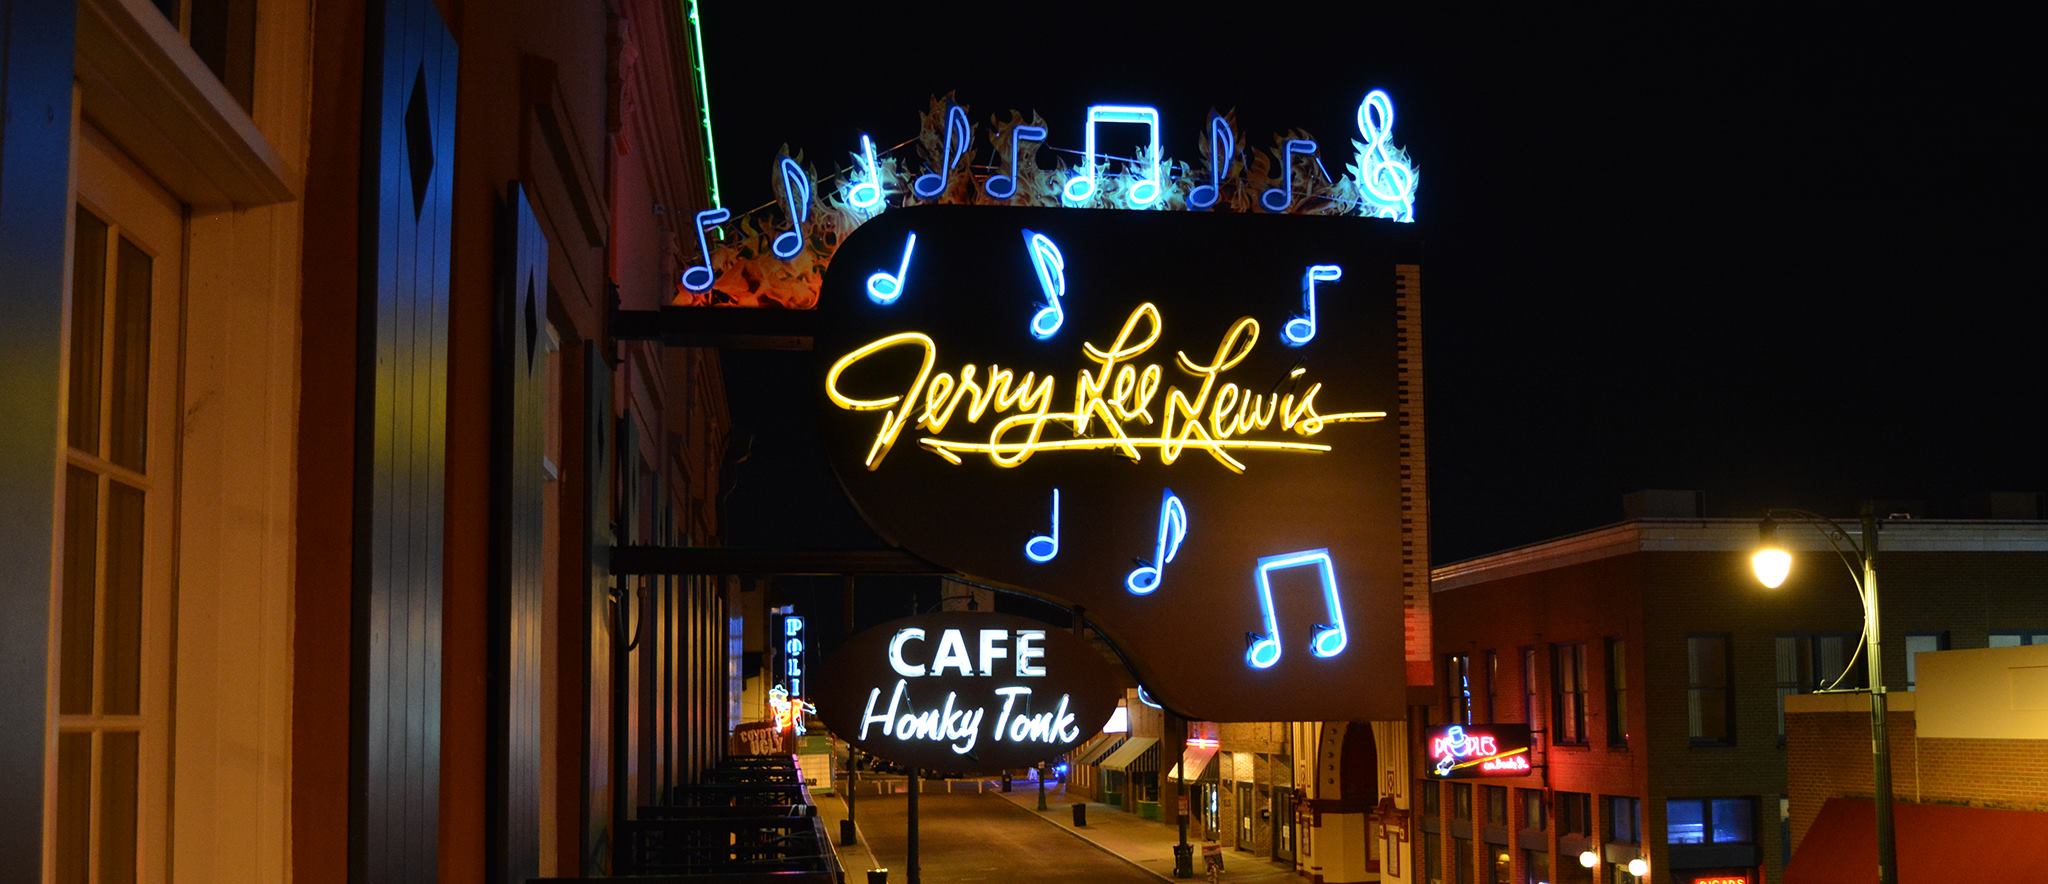 About - Jerry Lee Lewis' Cafe & Honky Tonk